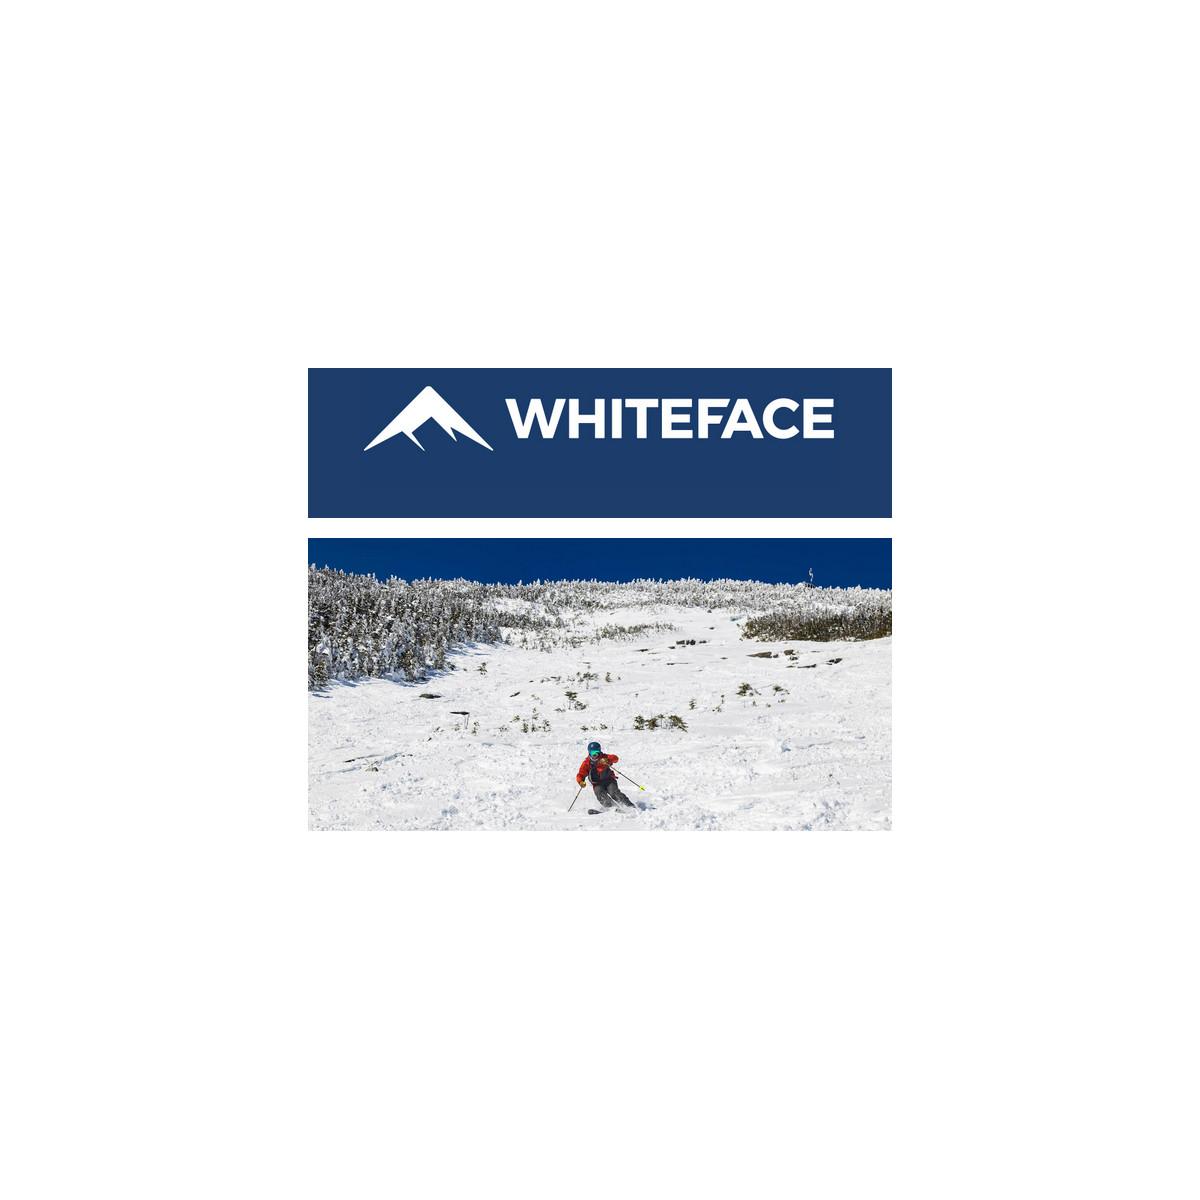 Whiteface Skier and Logo